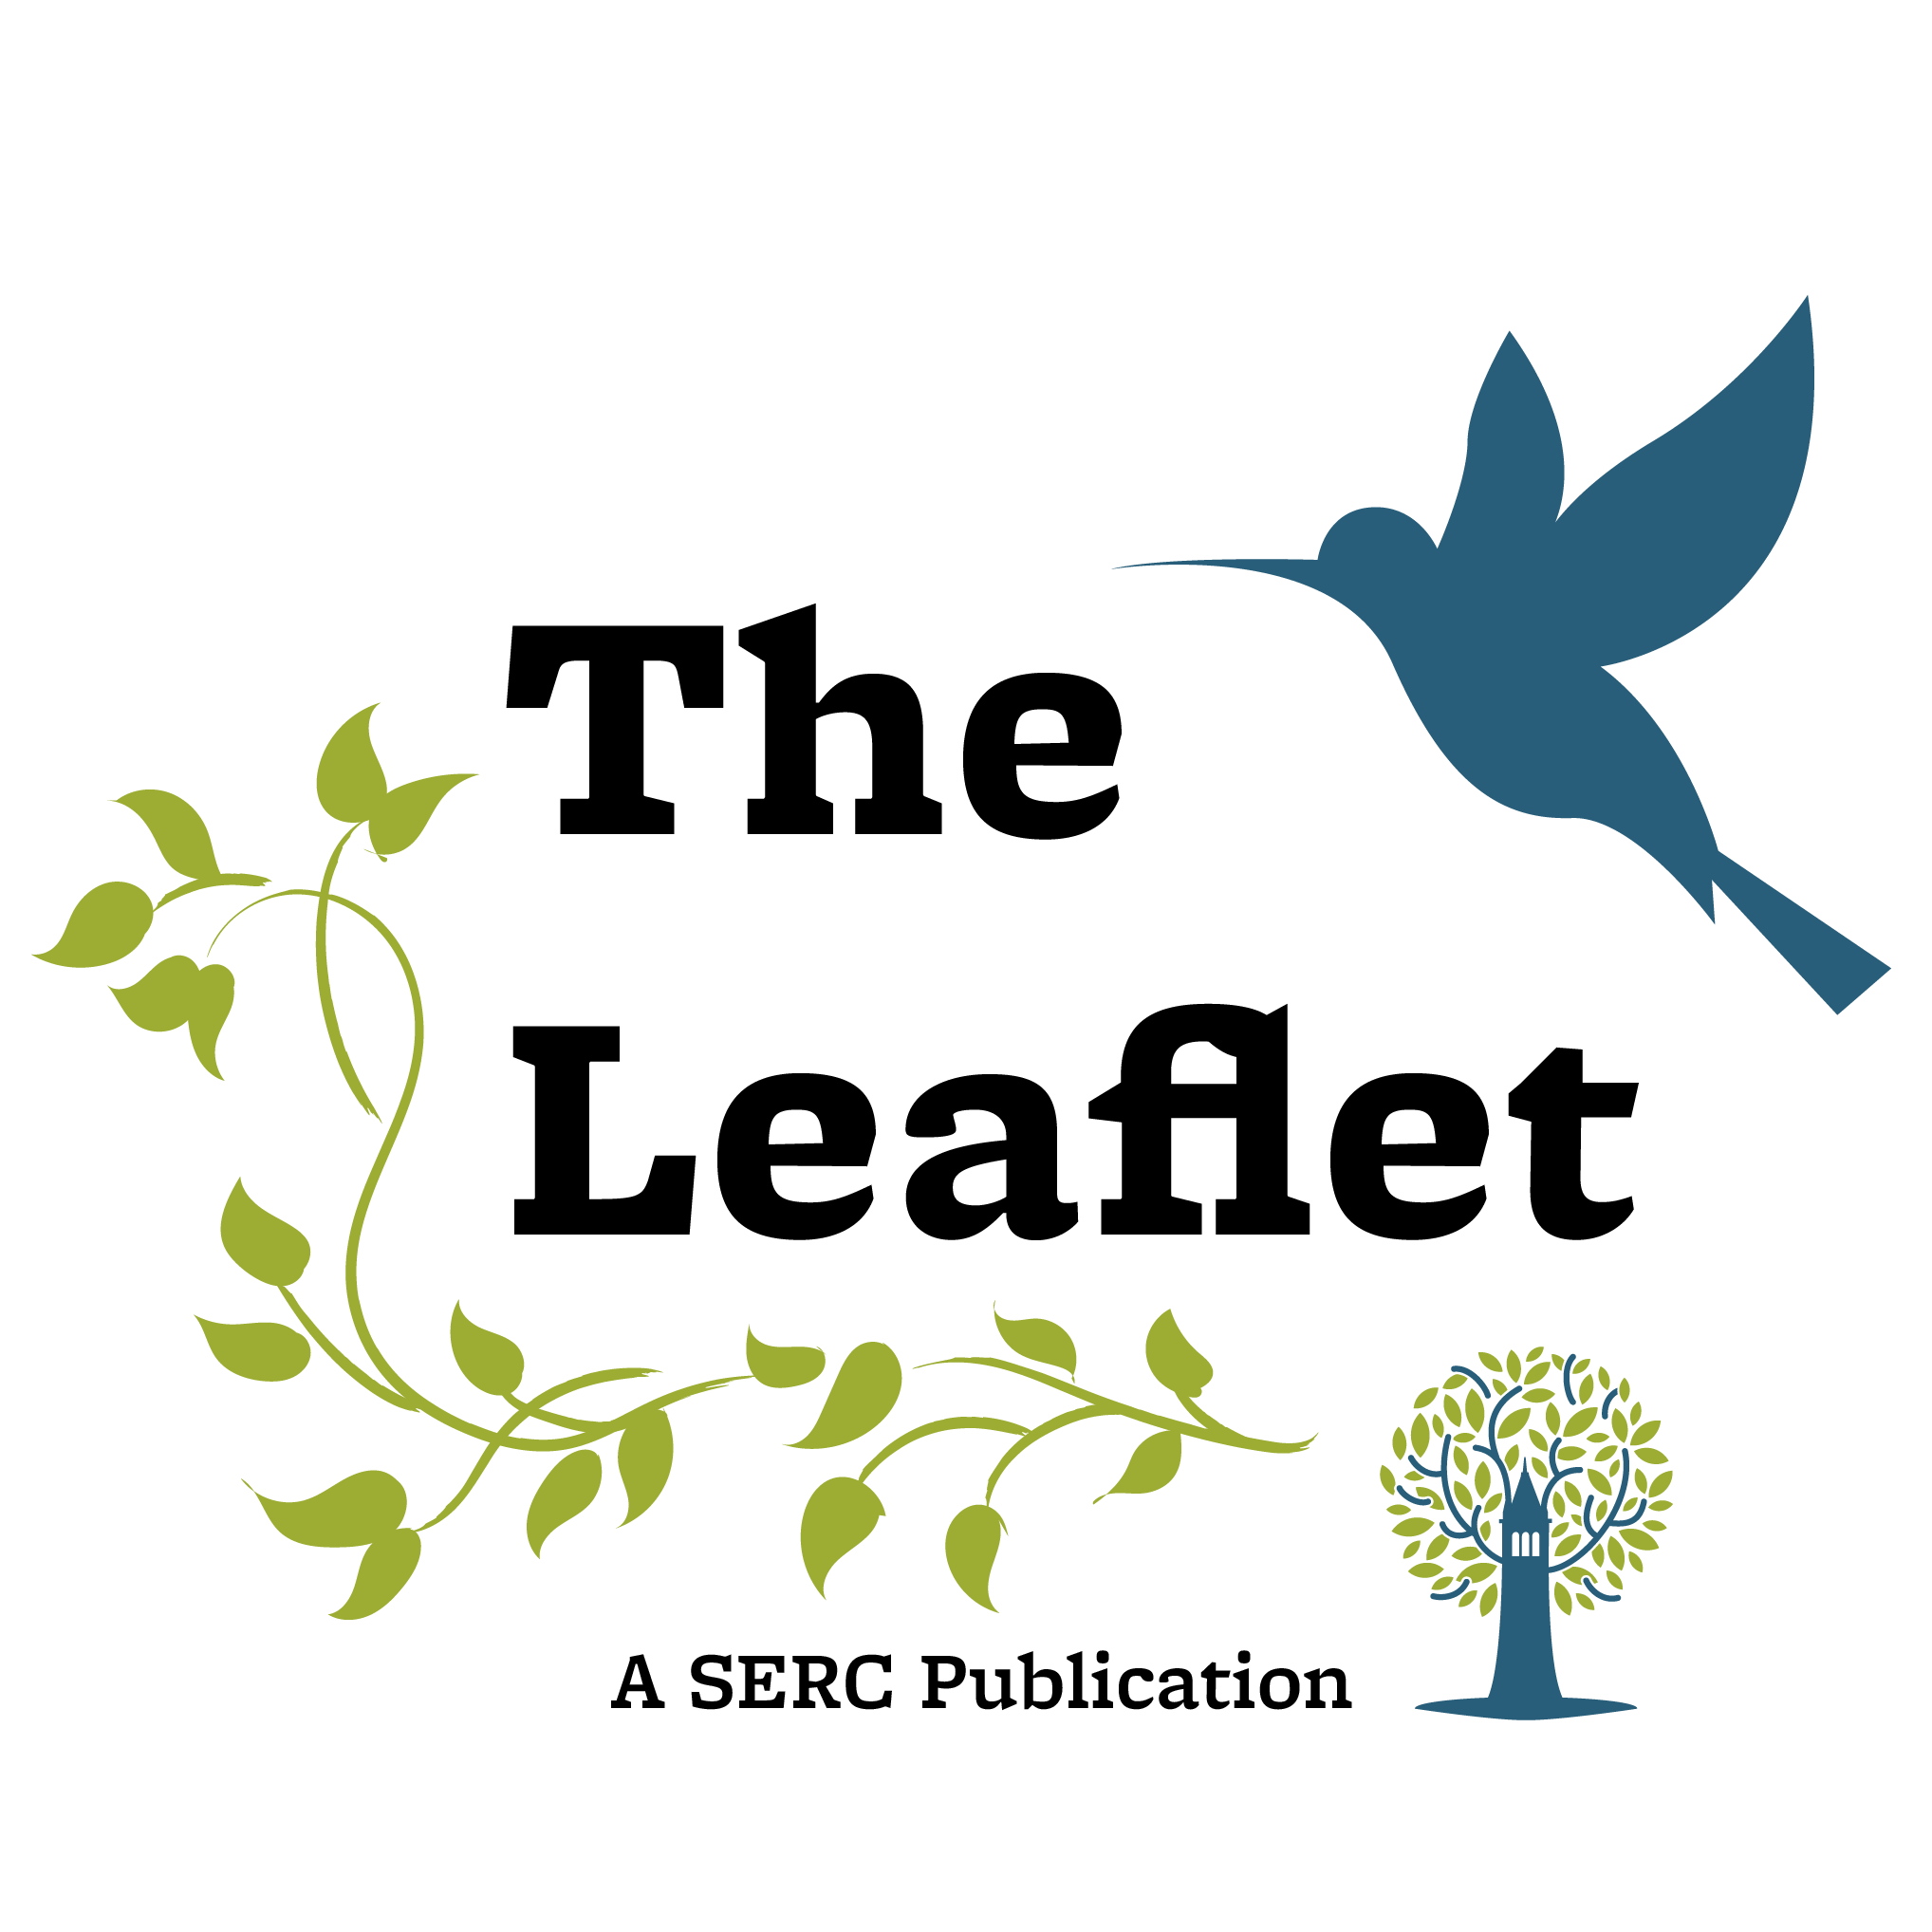 Leaflet Logo - Welcome to “The Leaflet” – Student Environmental Resource Center